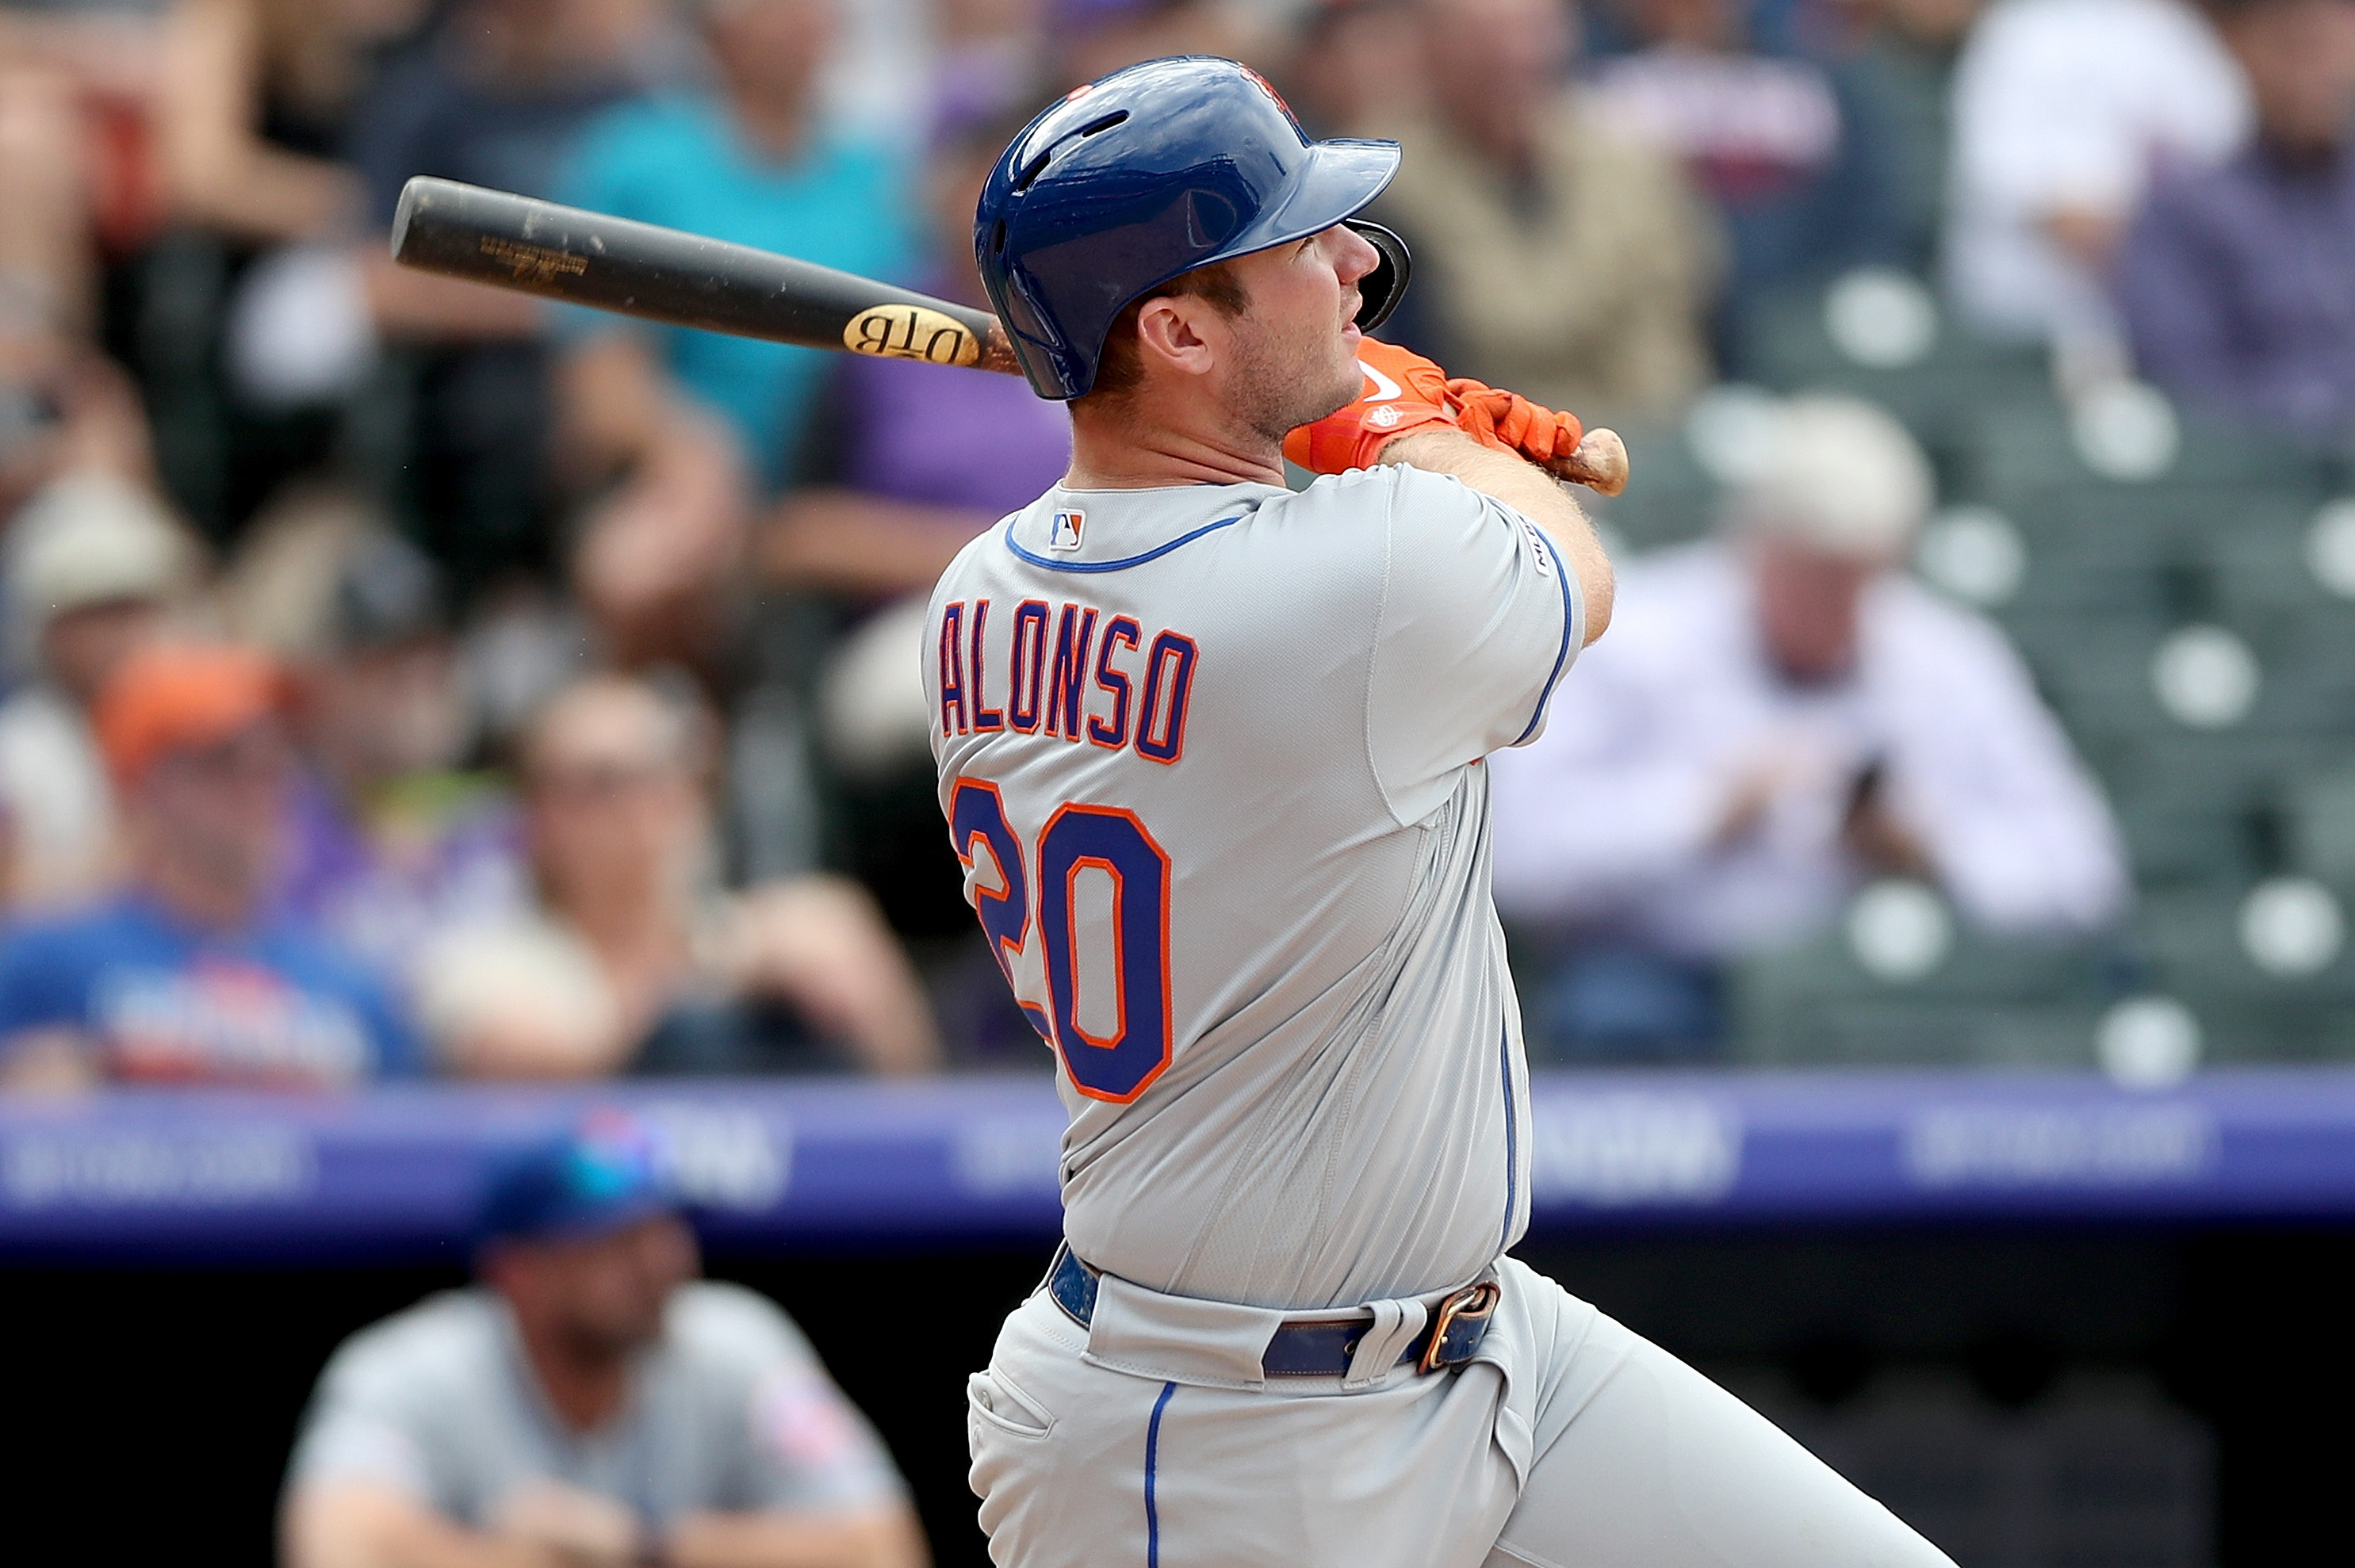 The Mets' Pete Alonso Is MLB's New Rookie Home Run King - The Ringer